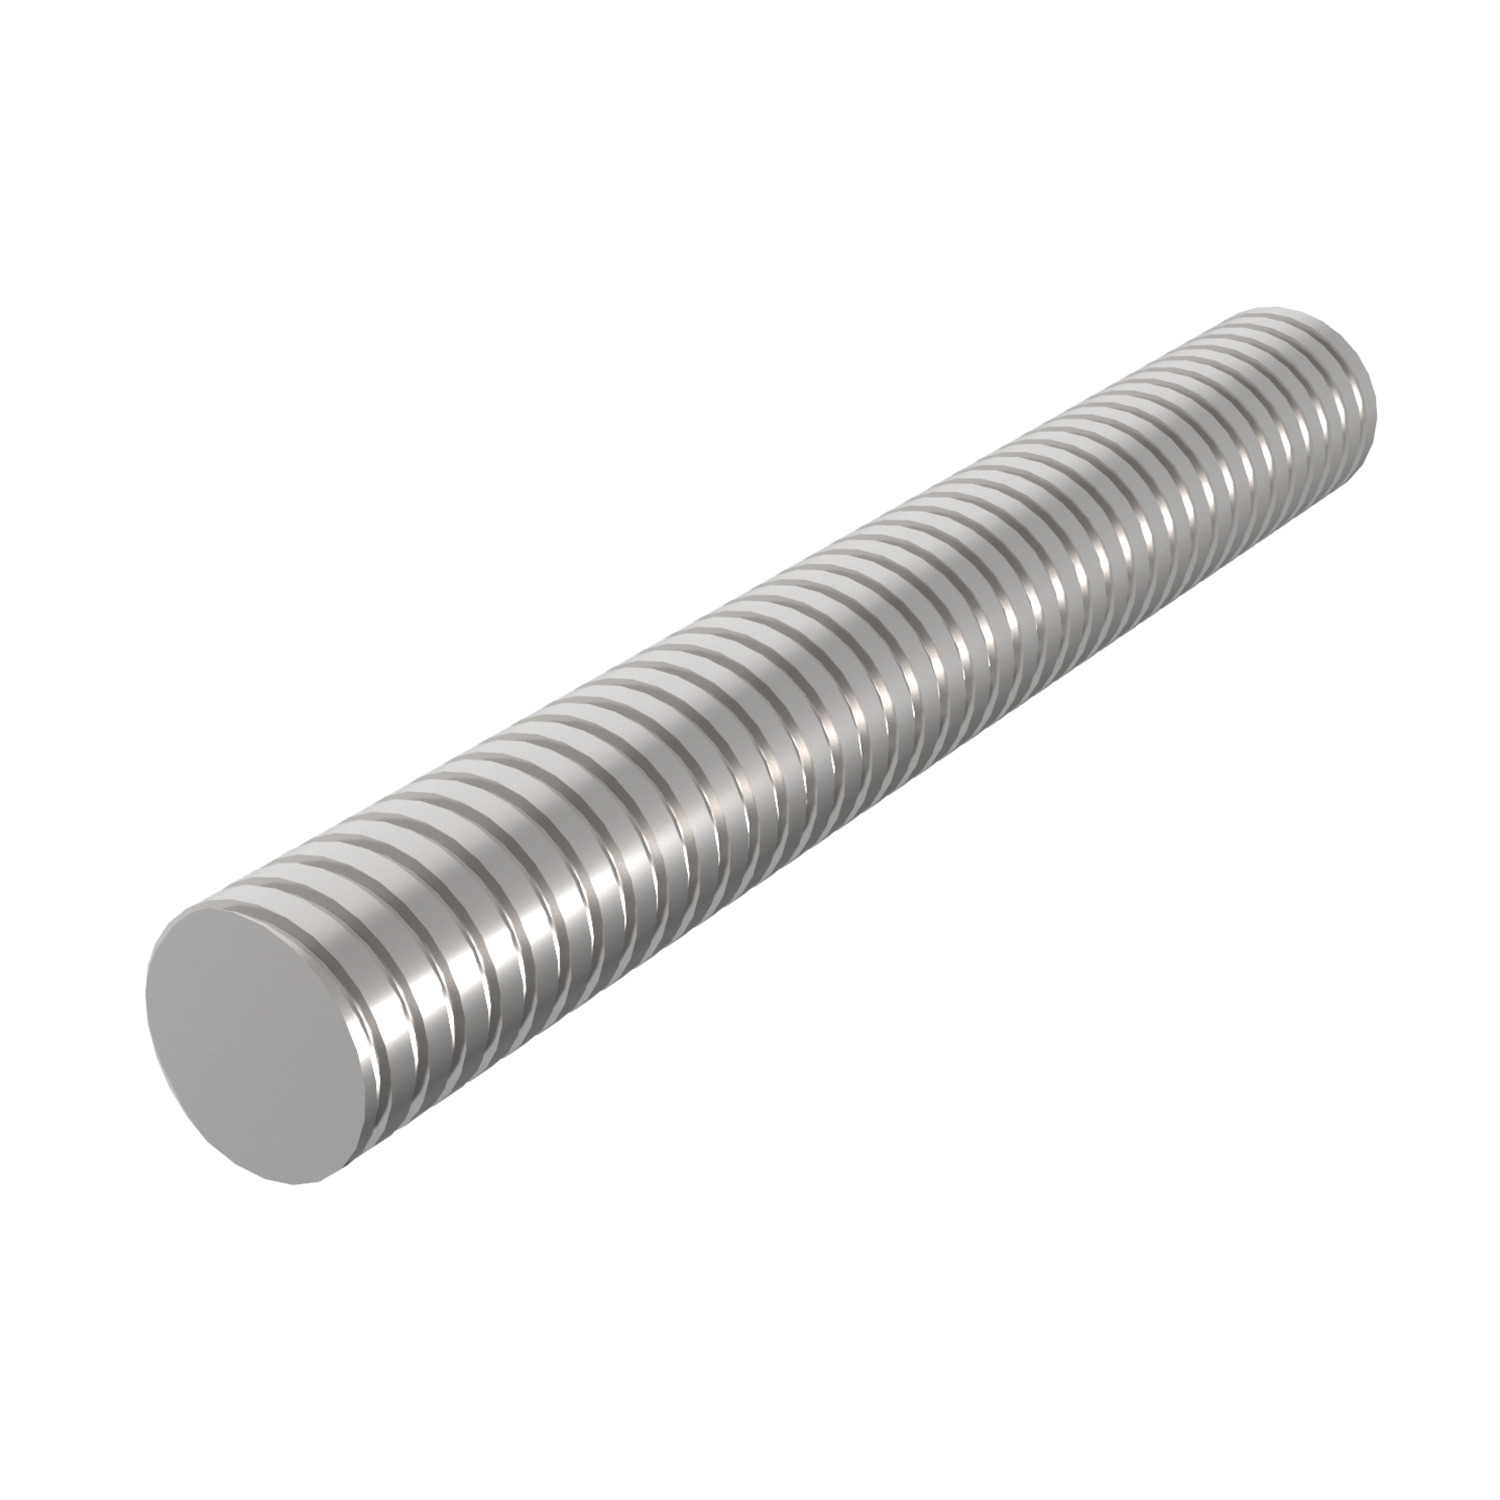 Commercial Lead Screws & Nuts